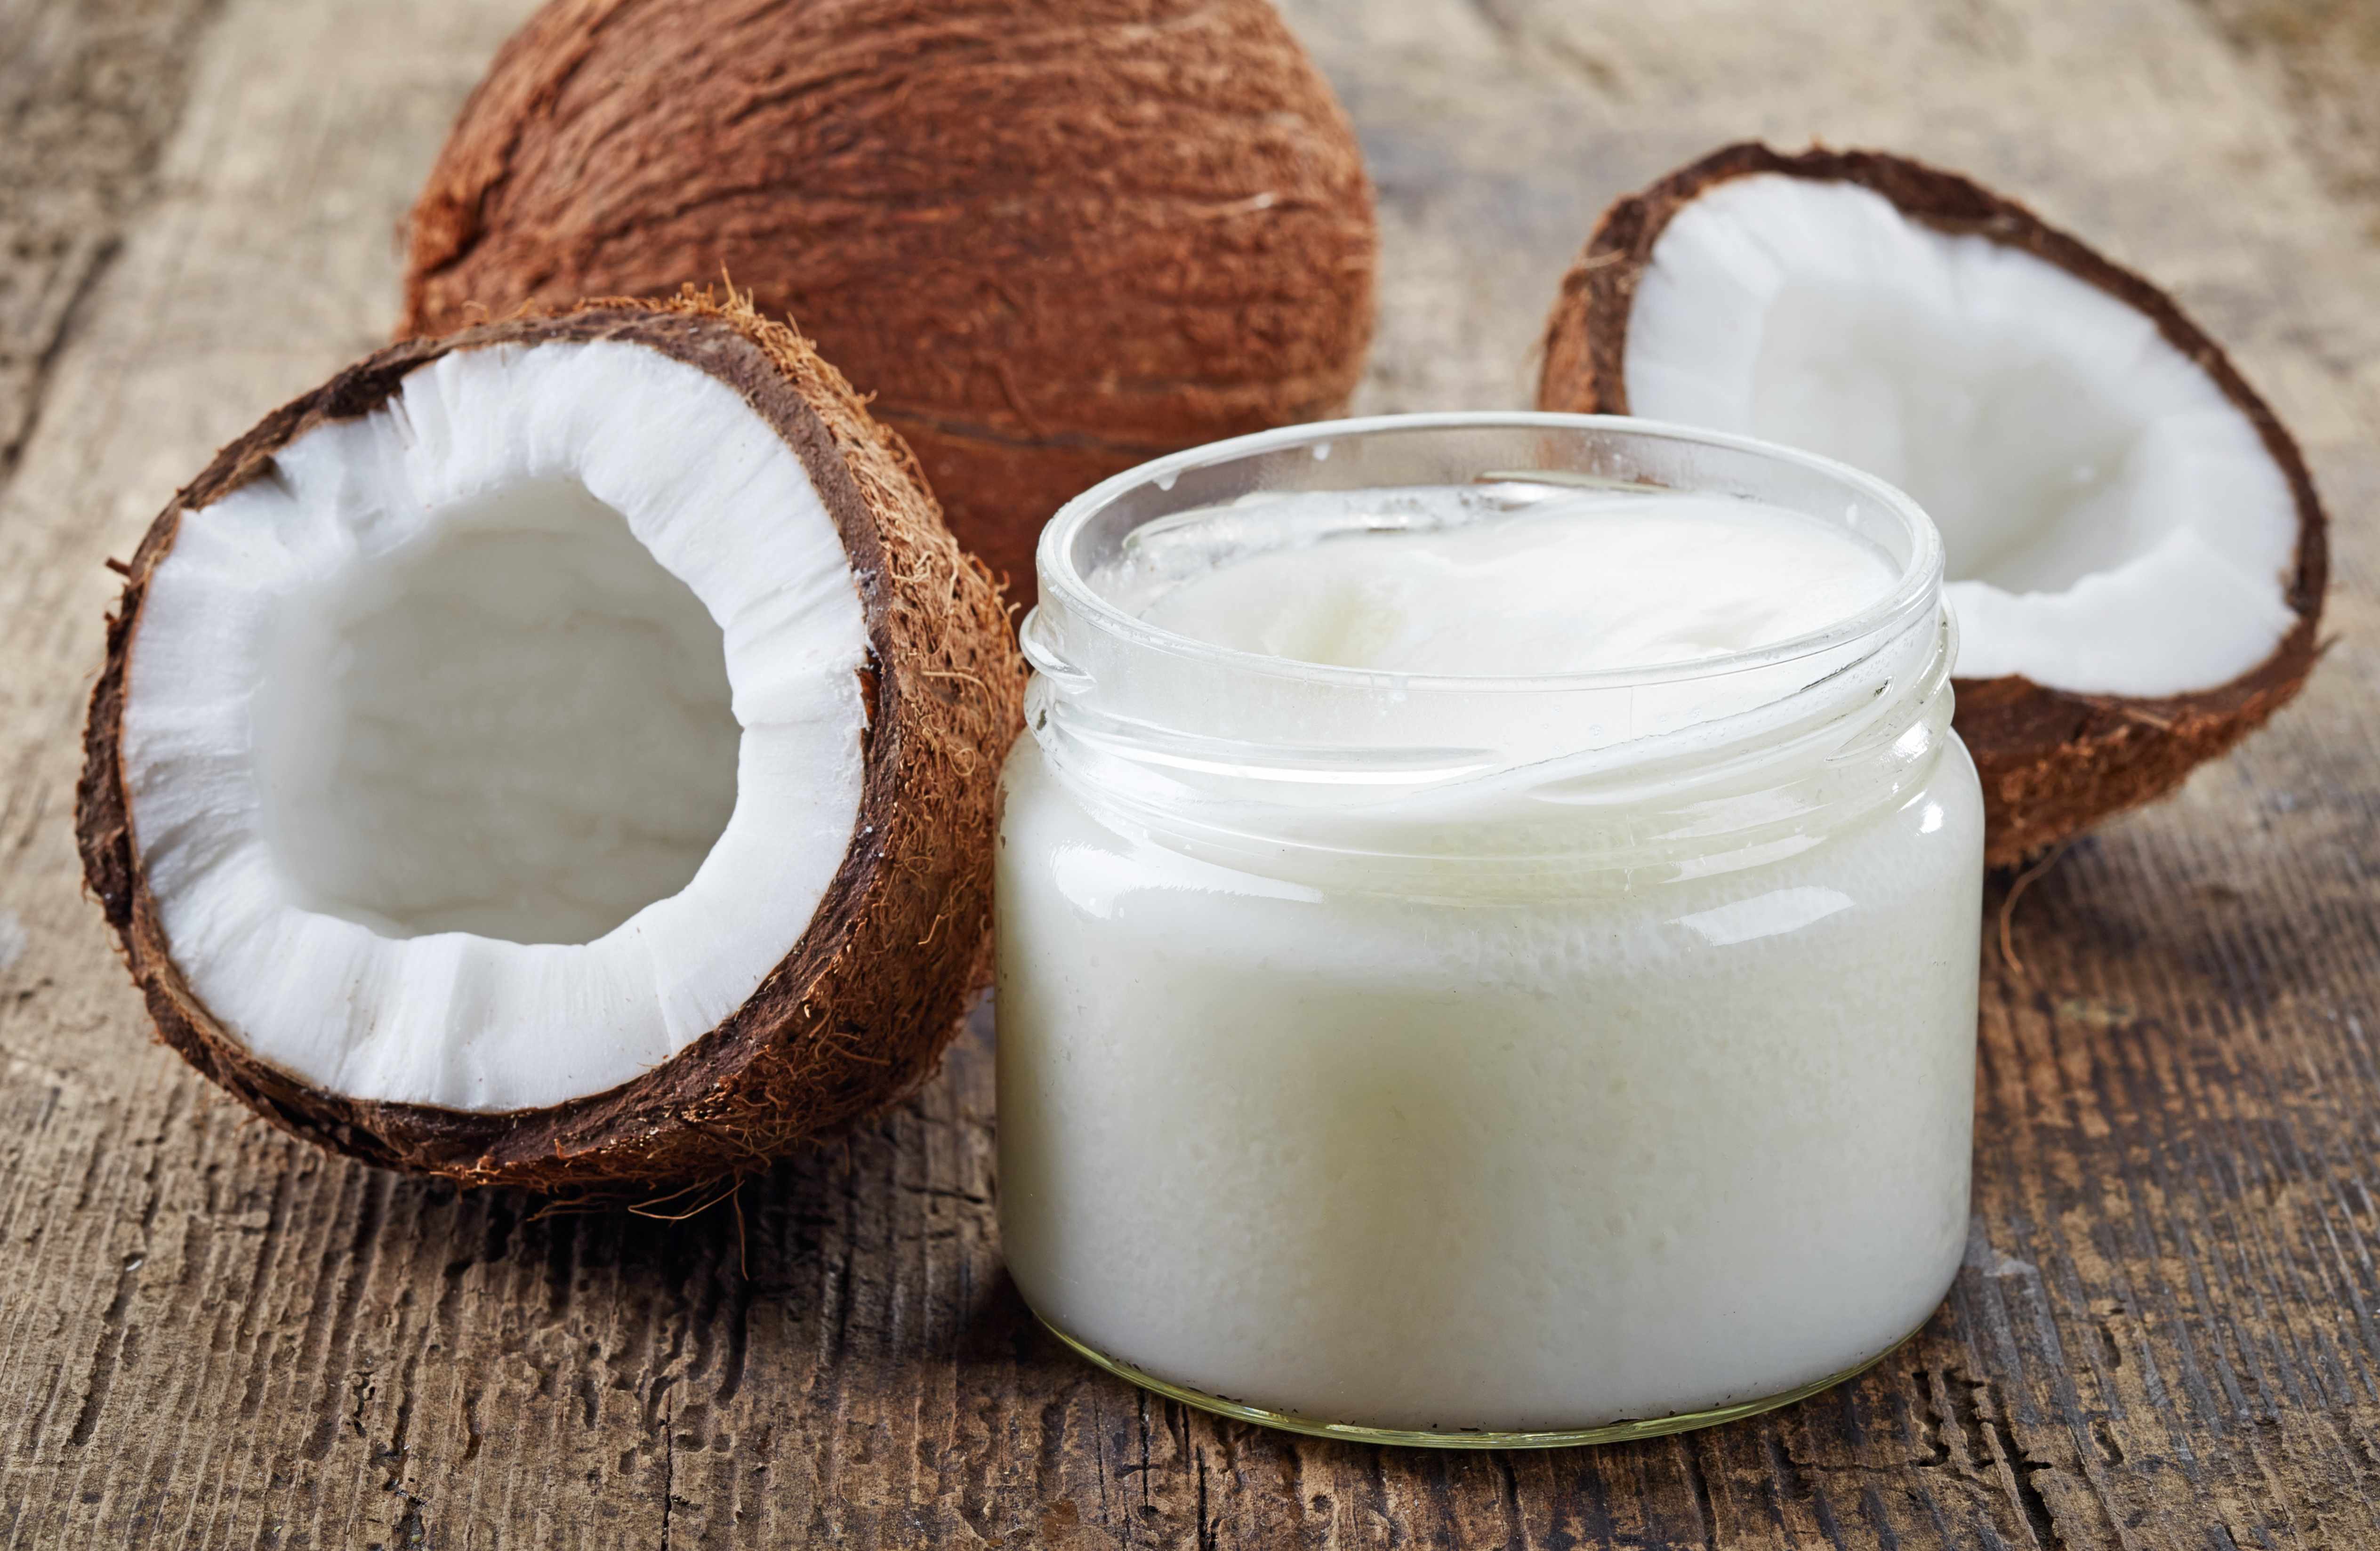 a coconut cut in half, sitting on a wooden table with a jar of coconut oil or butter